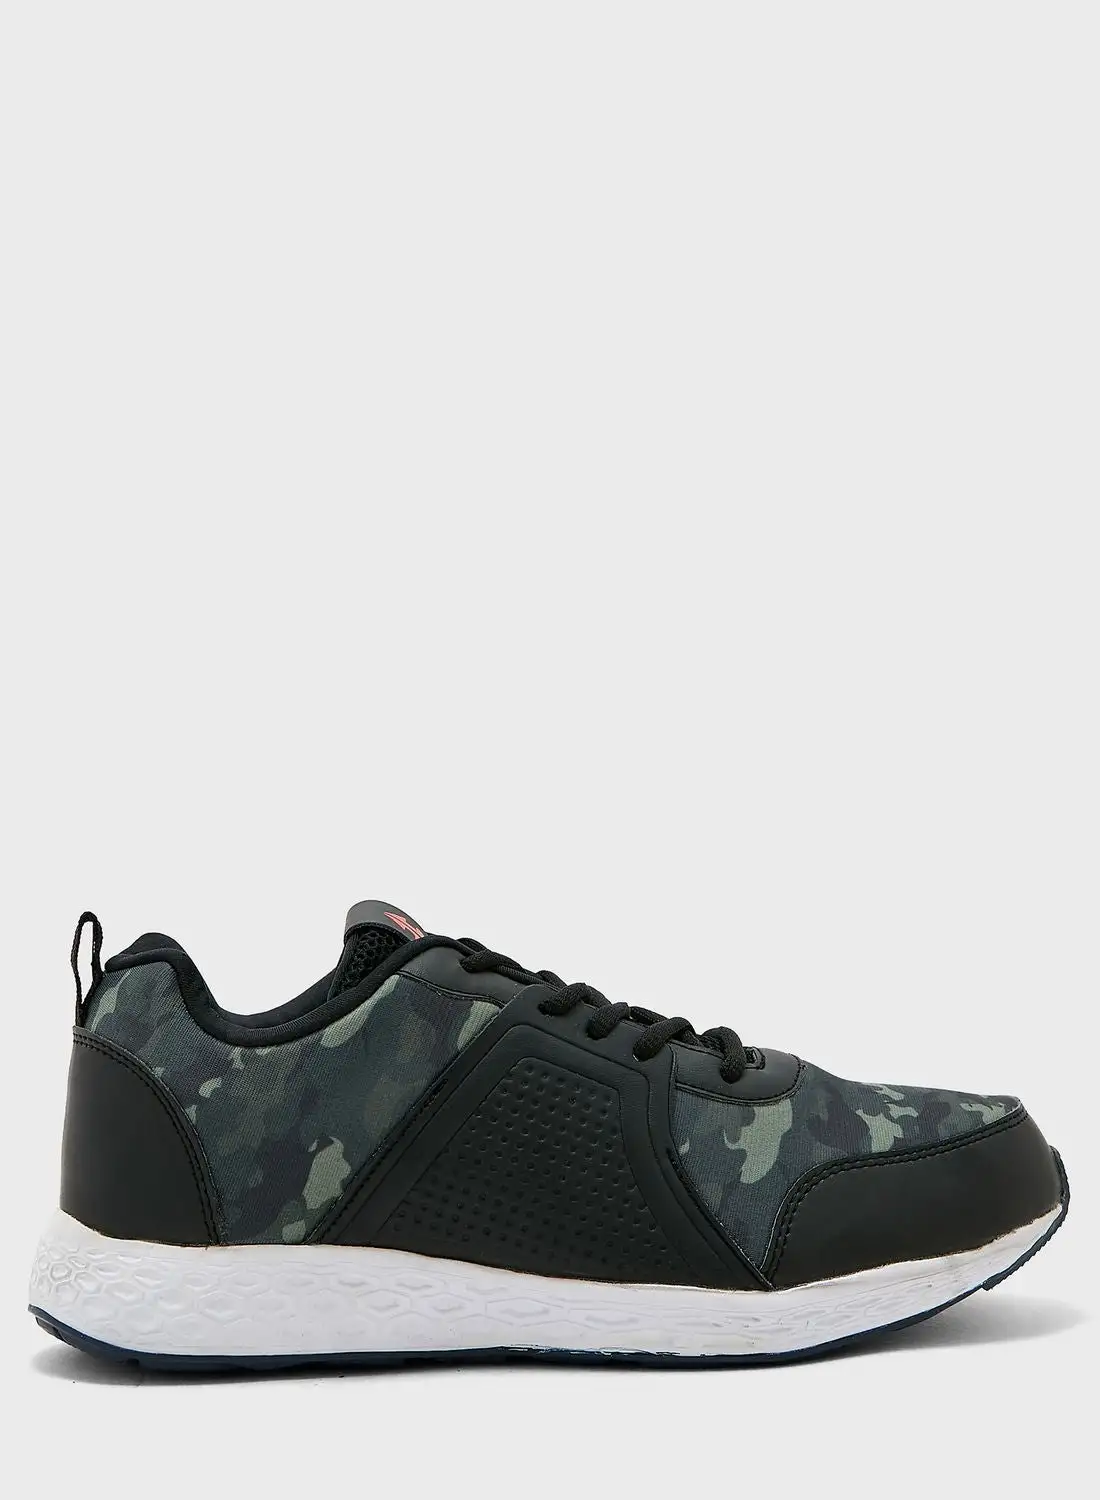 OFF LIMITS Storm Sneakers